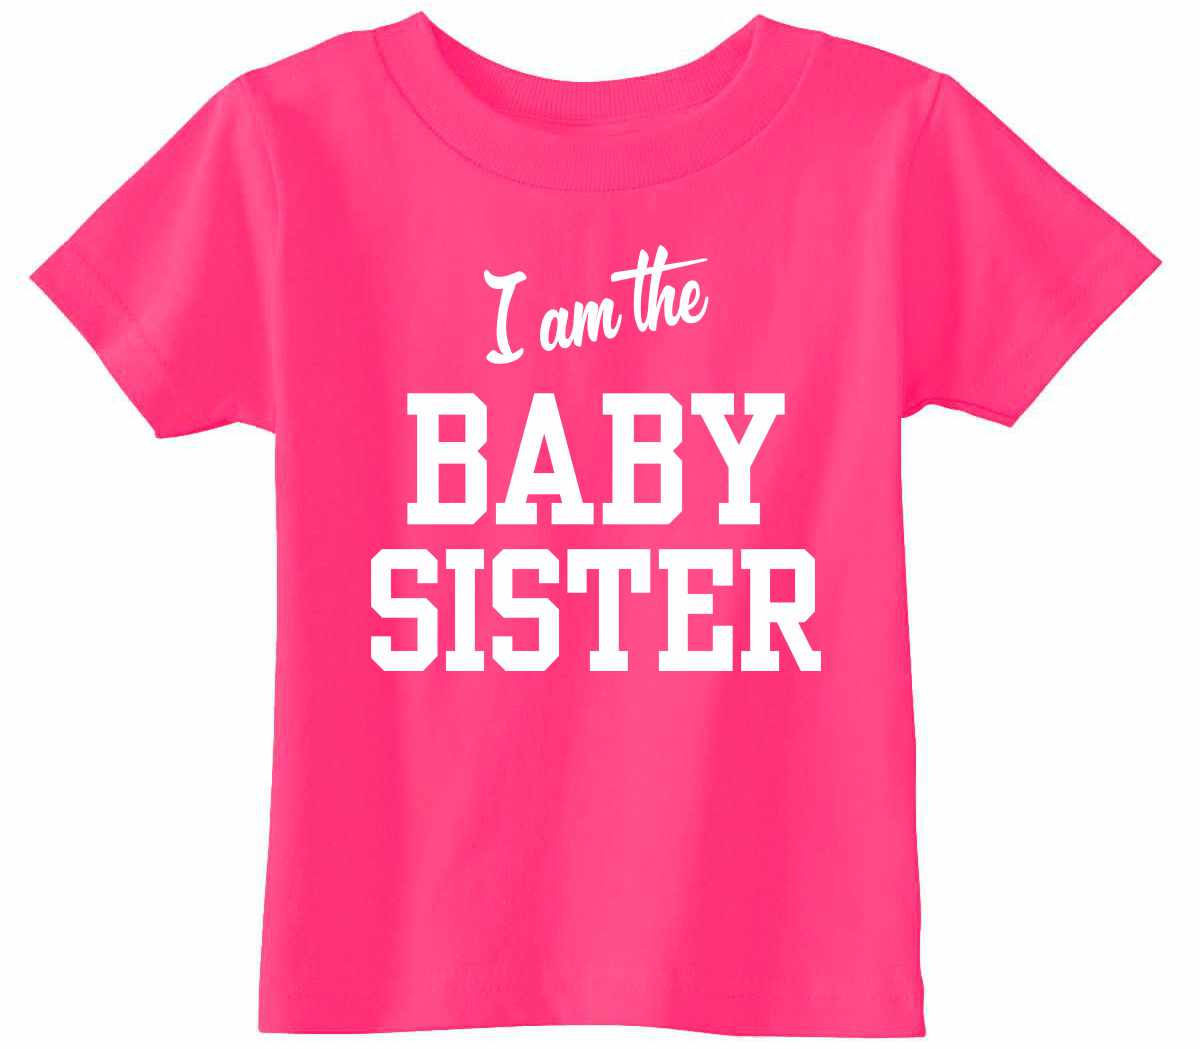 I am the Baby Sister on Infant-Toddler T-Shirt (#1292-7)